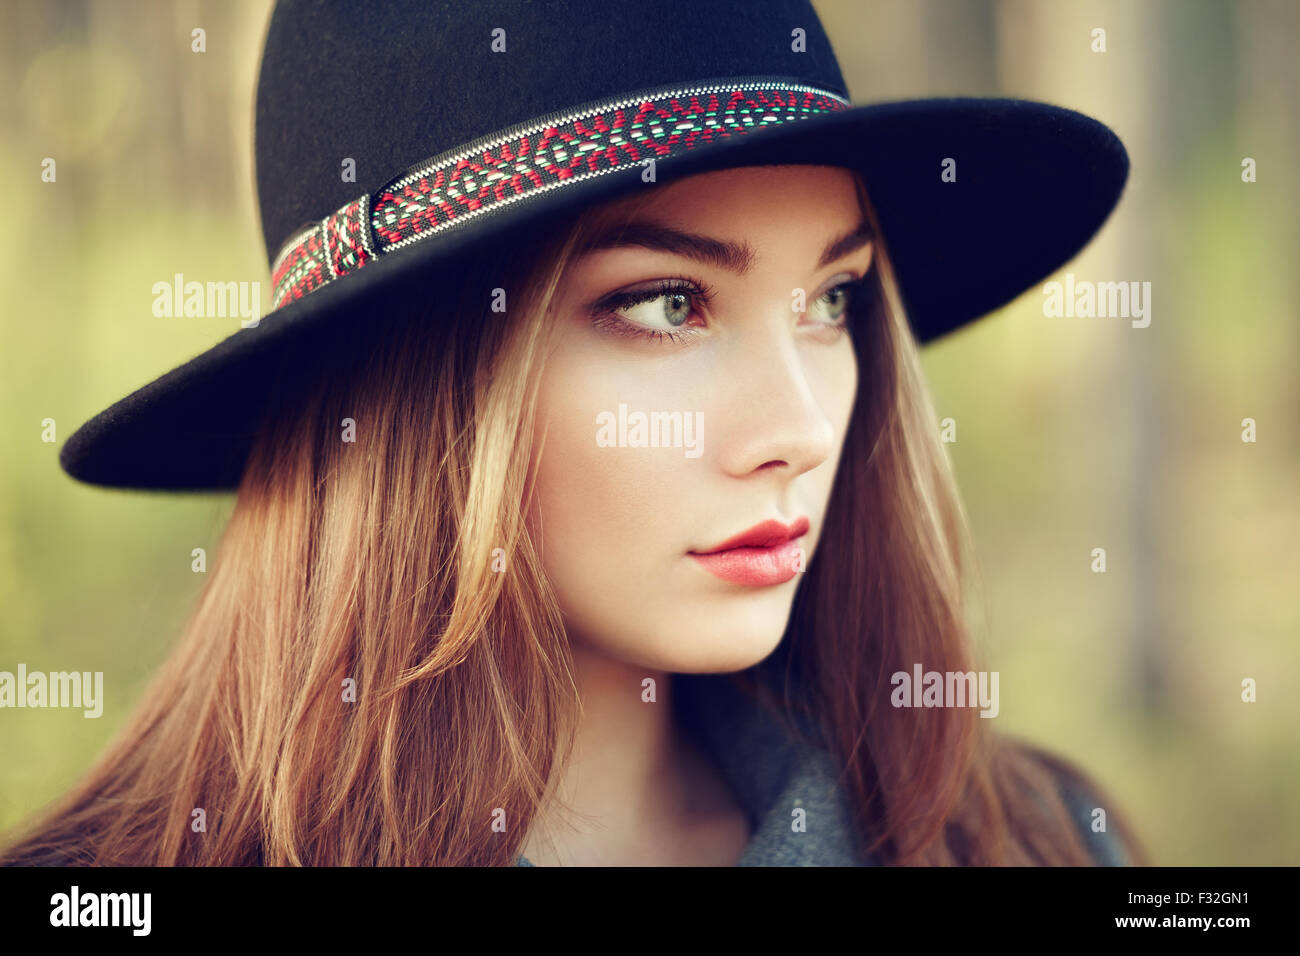 Portrait of young beautiful woman in autumn coat. Girl in hat. Fashion photo Stock Photo